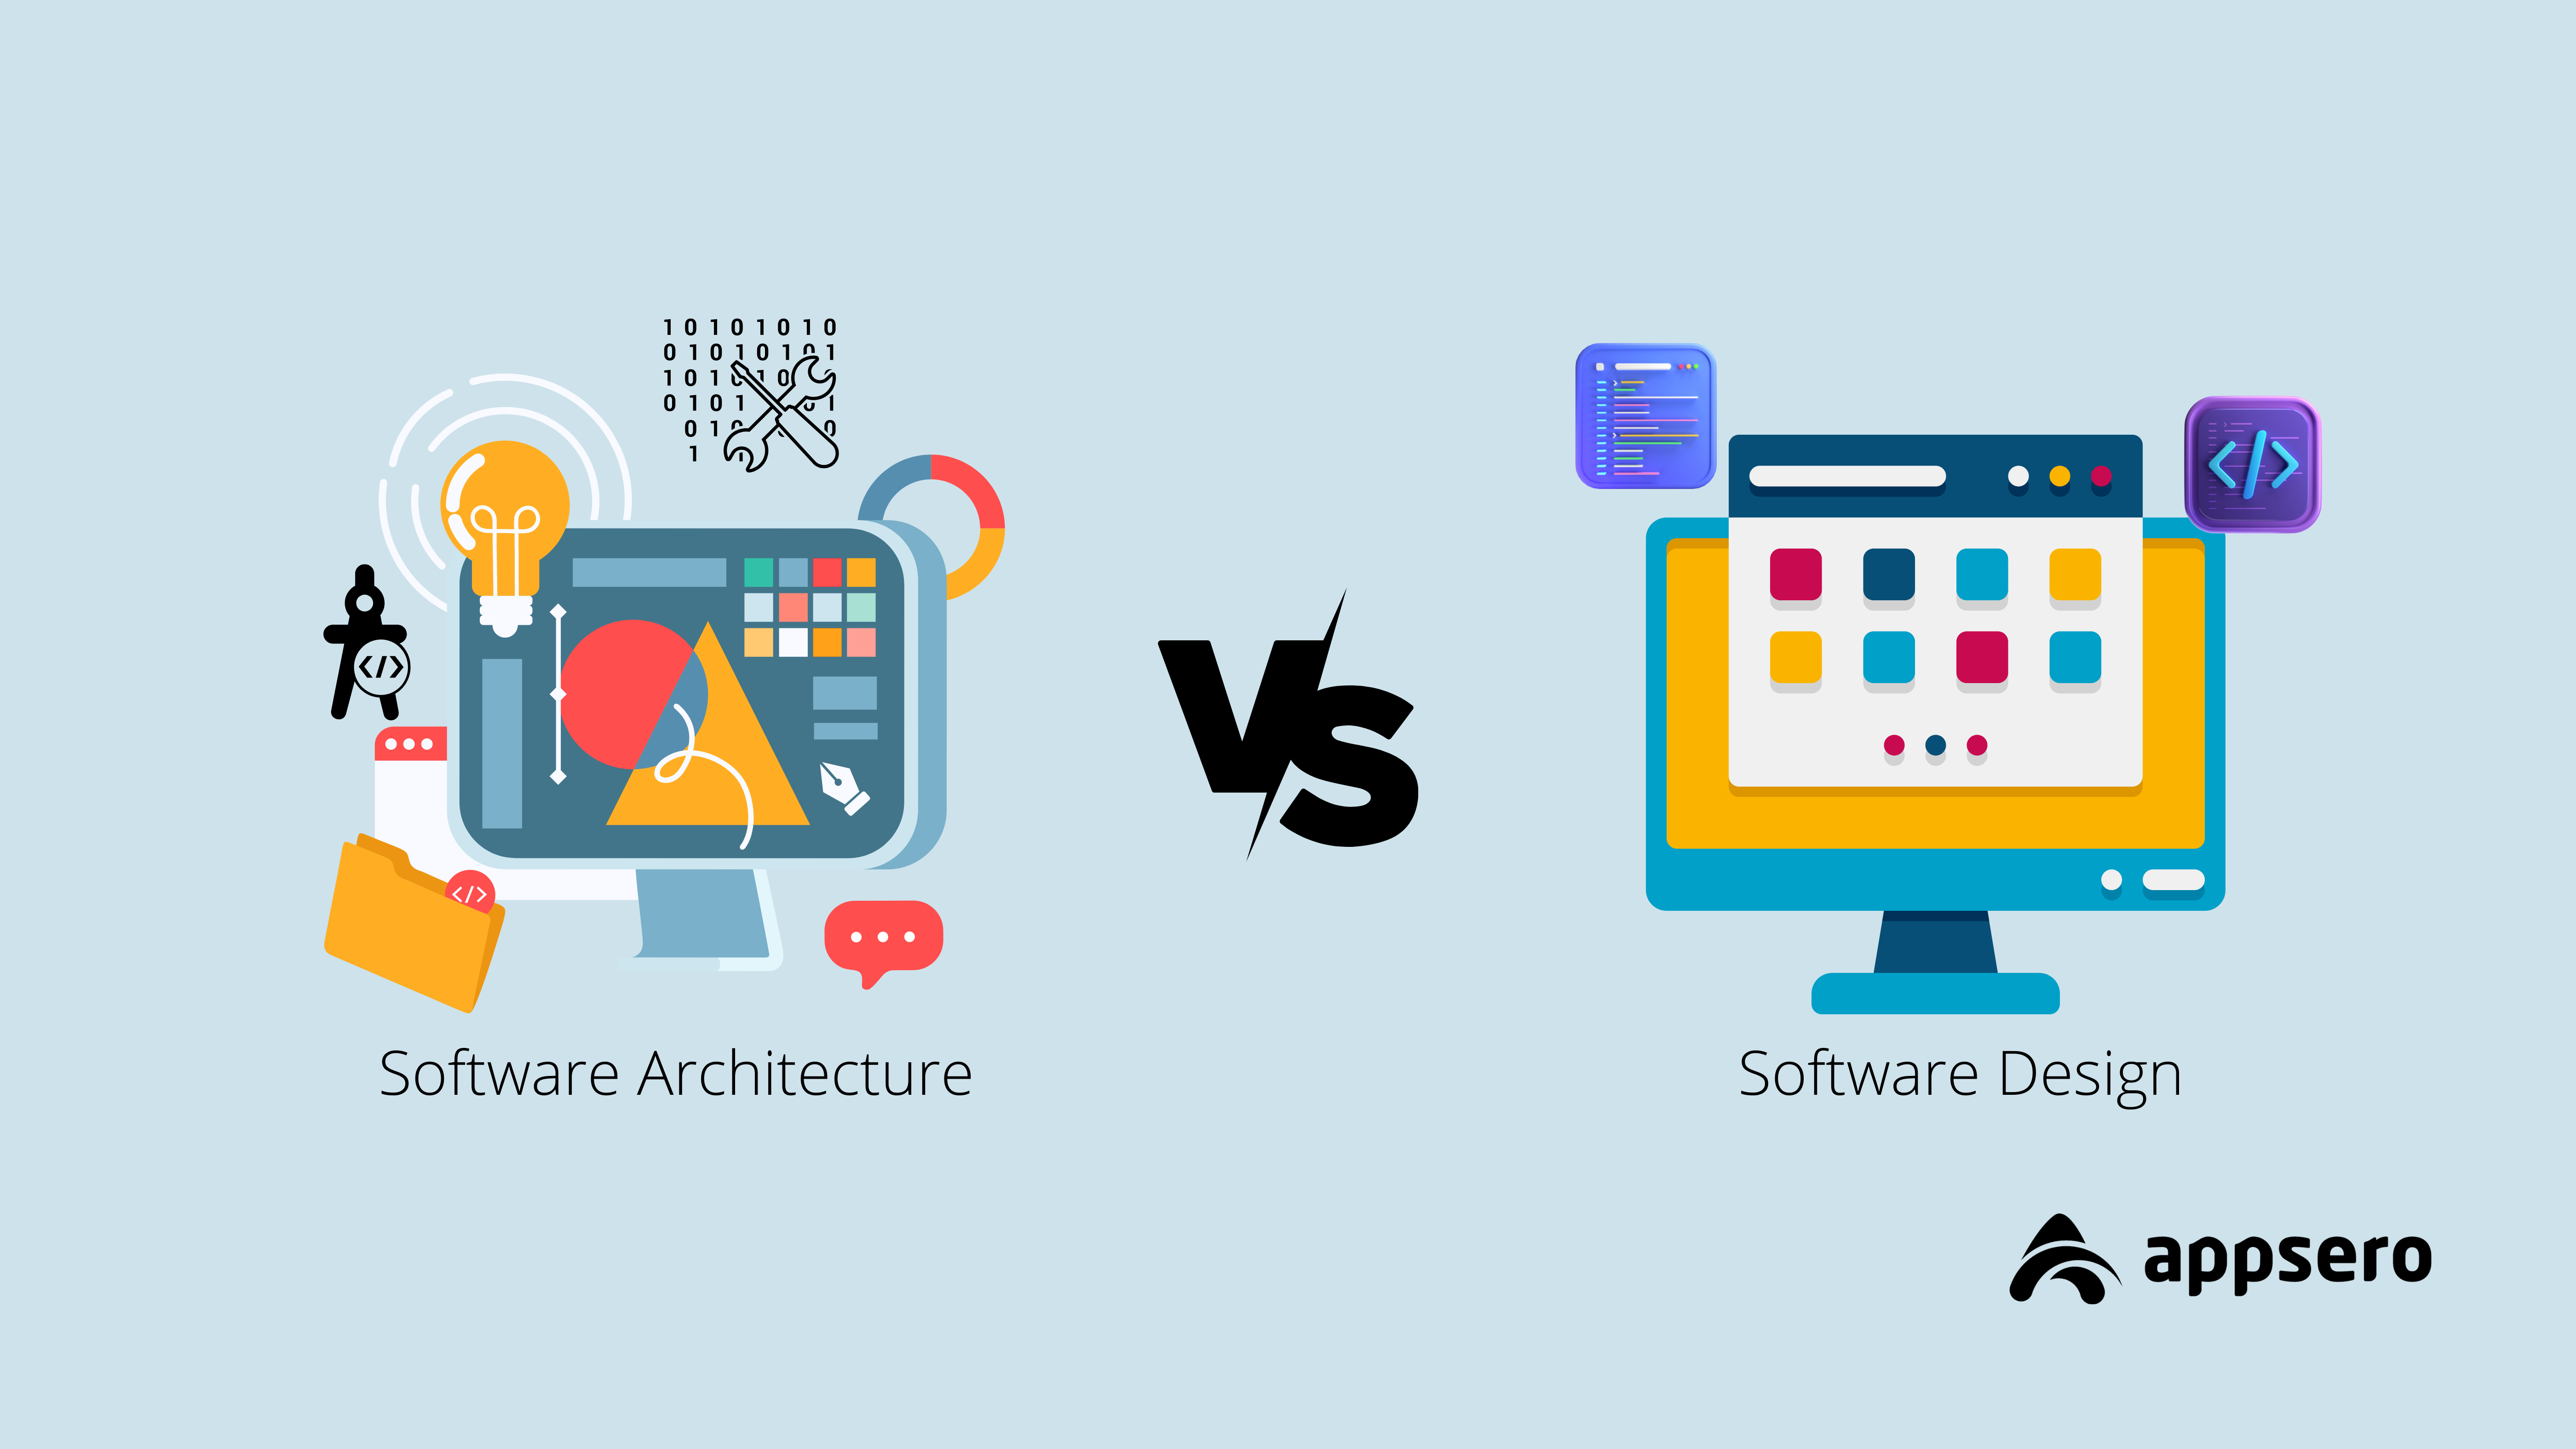 Key difference between software architecture vs design